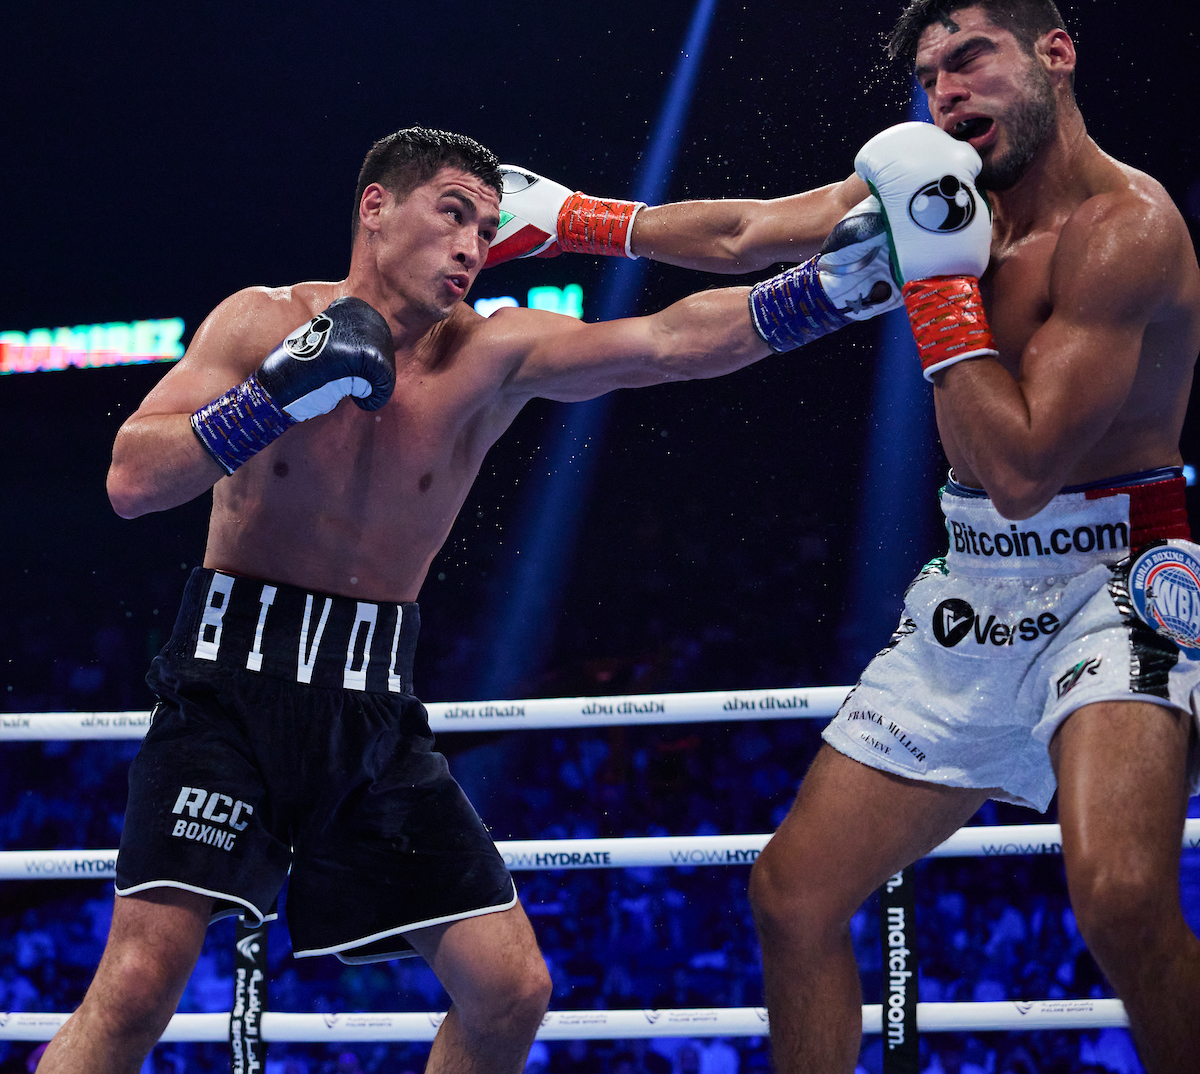 Dmitry Bivol 2022 was a good year for me but my dream is to be the undisputed champ